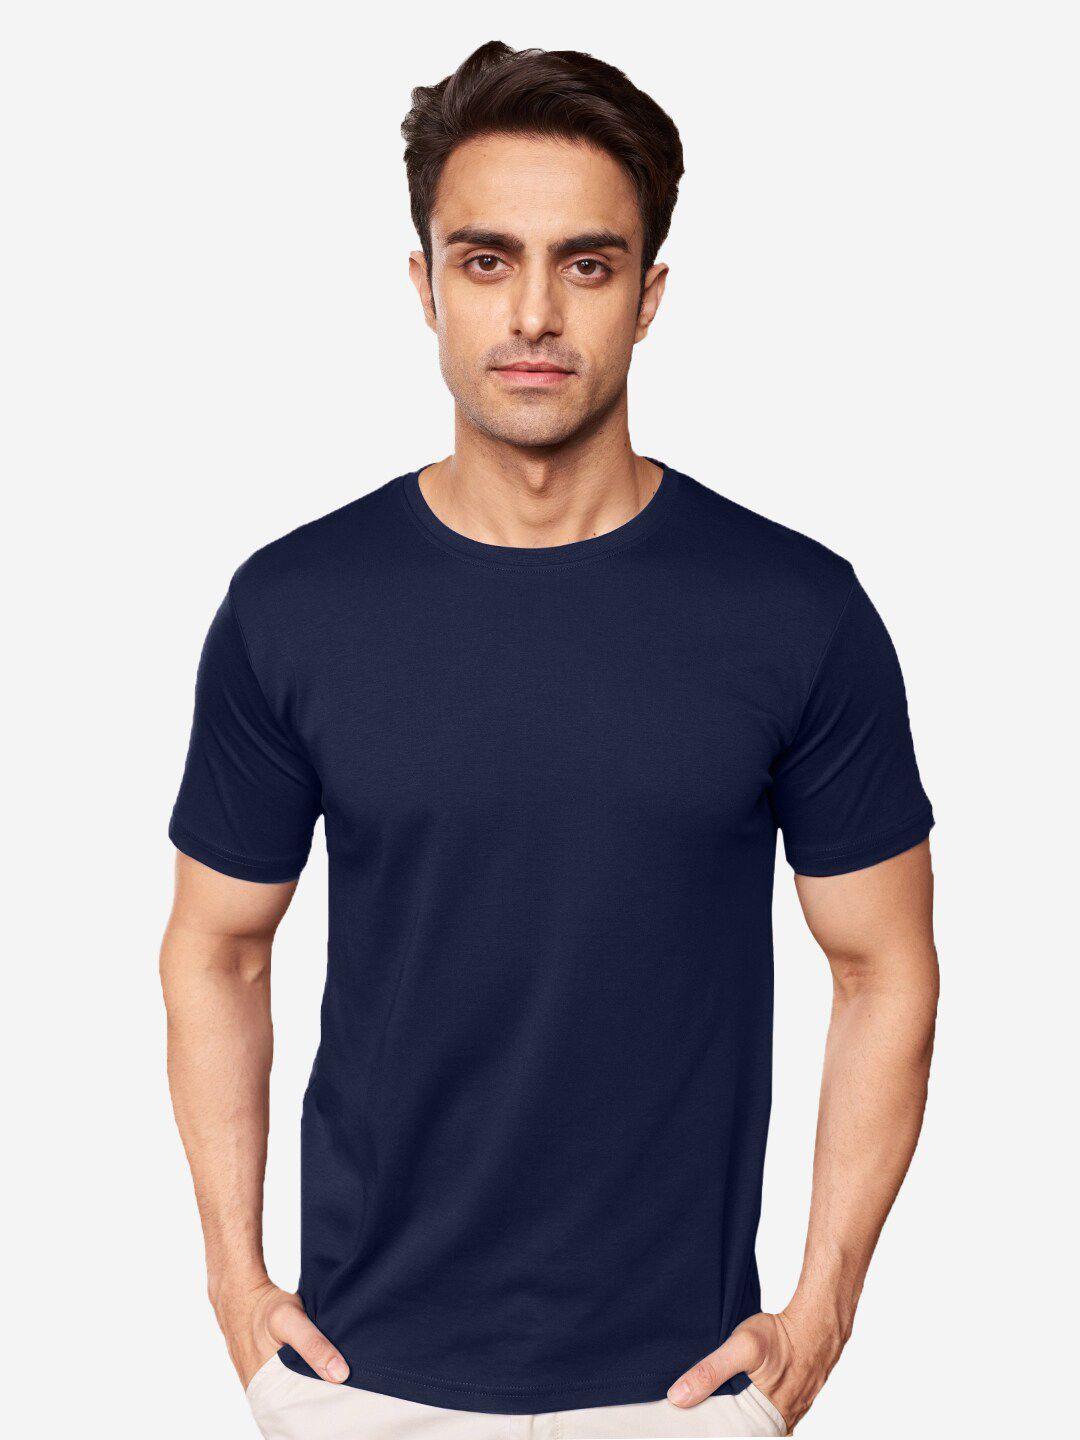 the souled store navy blue round neck pure cotton regular-fit t-shirt